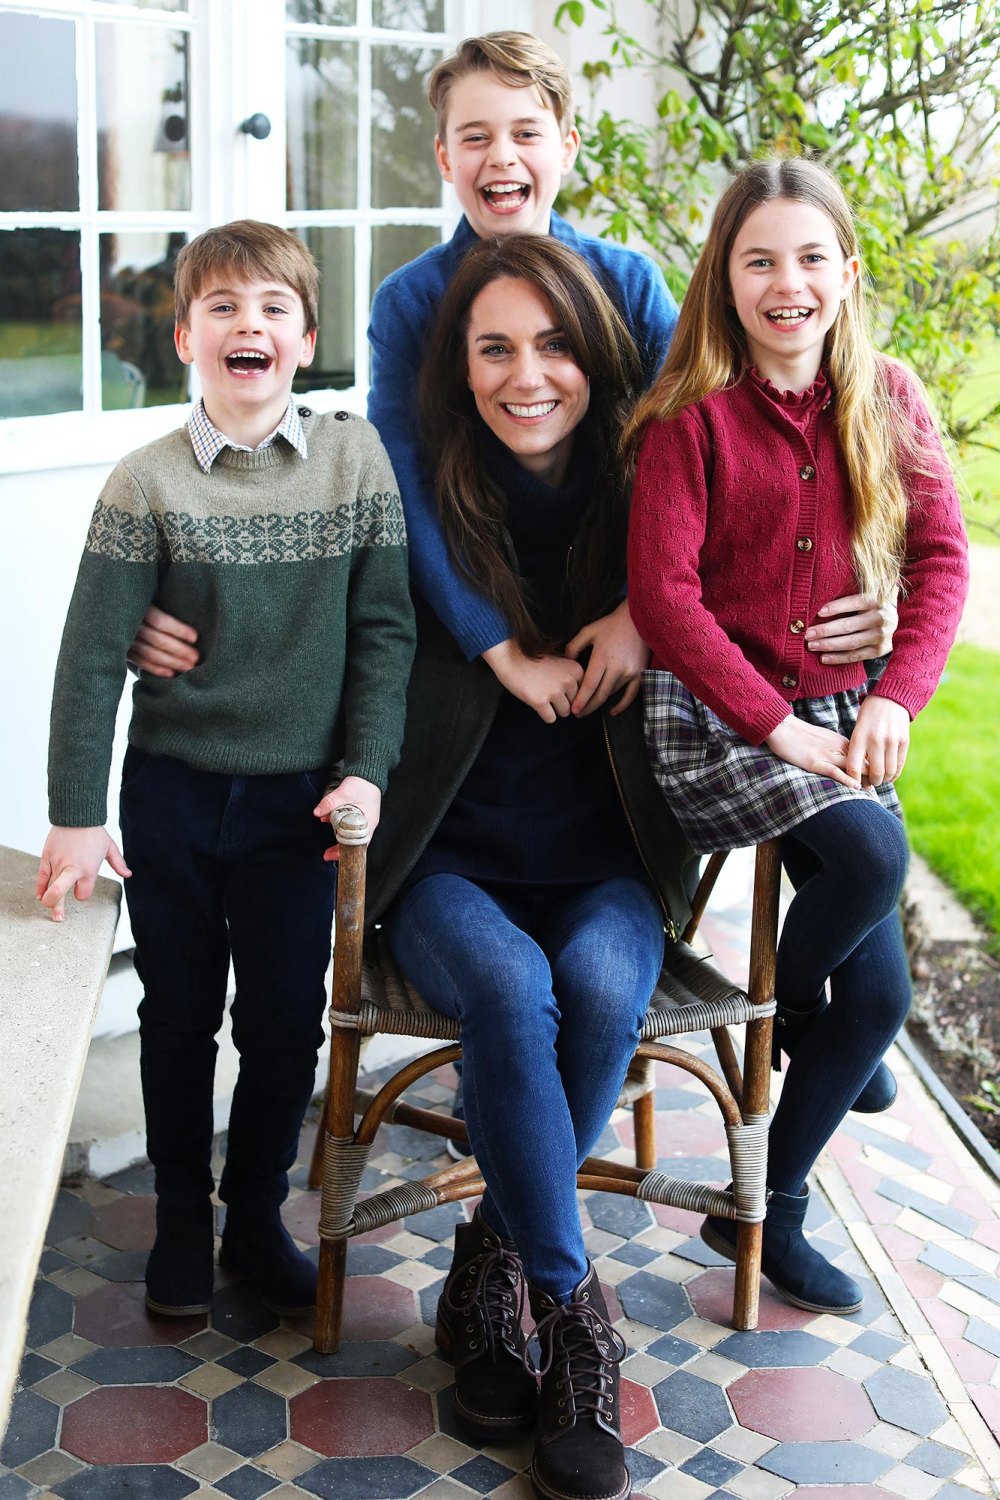 Kate Middleton Is Not Wearing Wedding Ring in Mother's Day Photo | Us ...